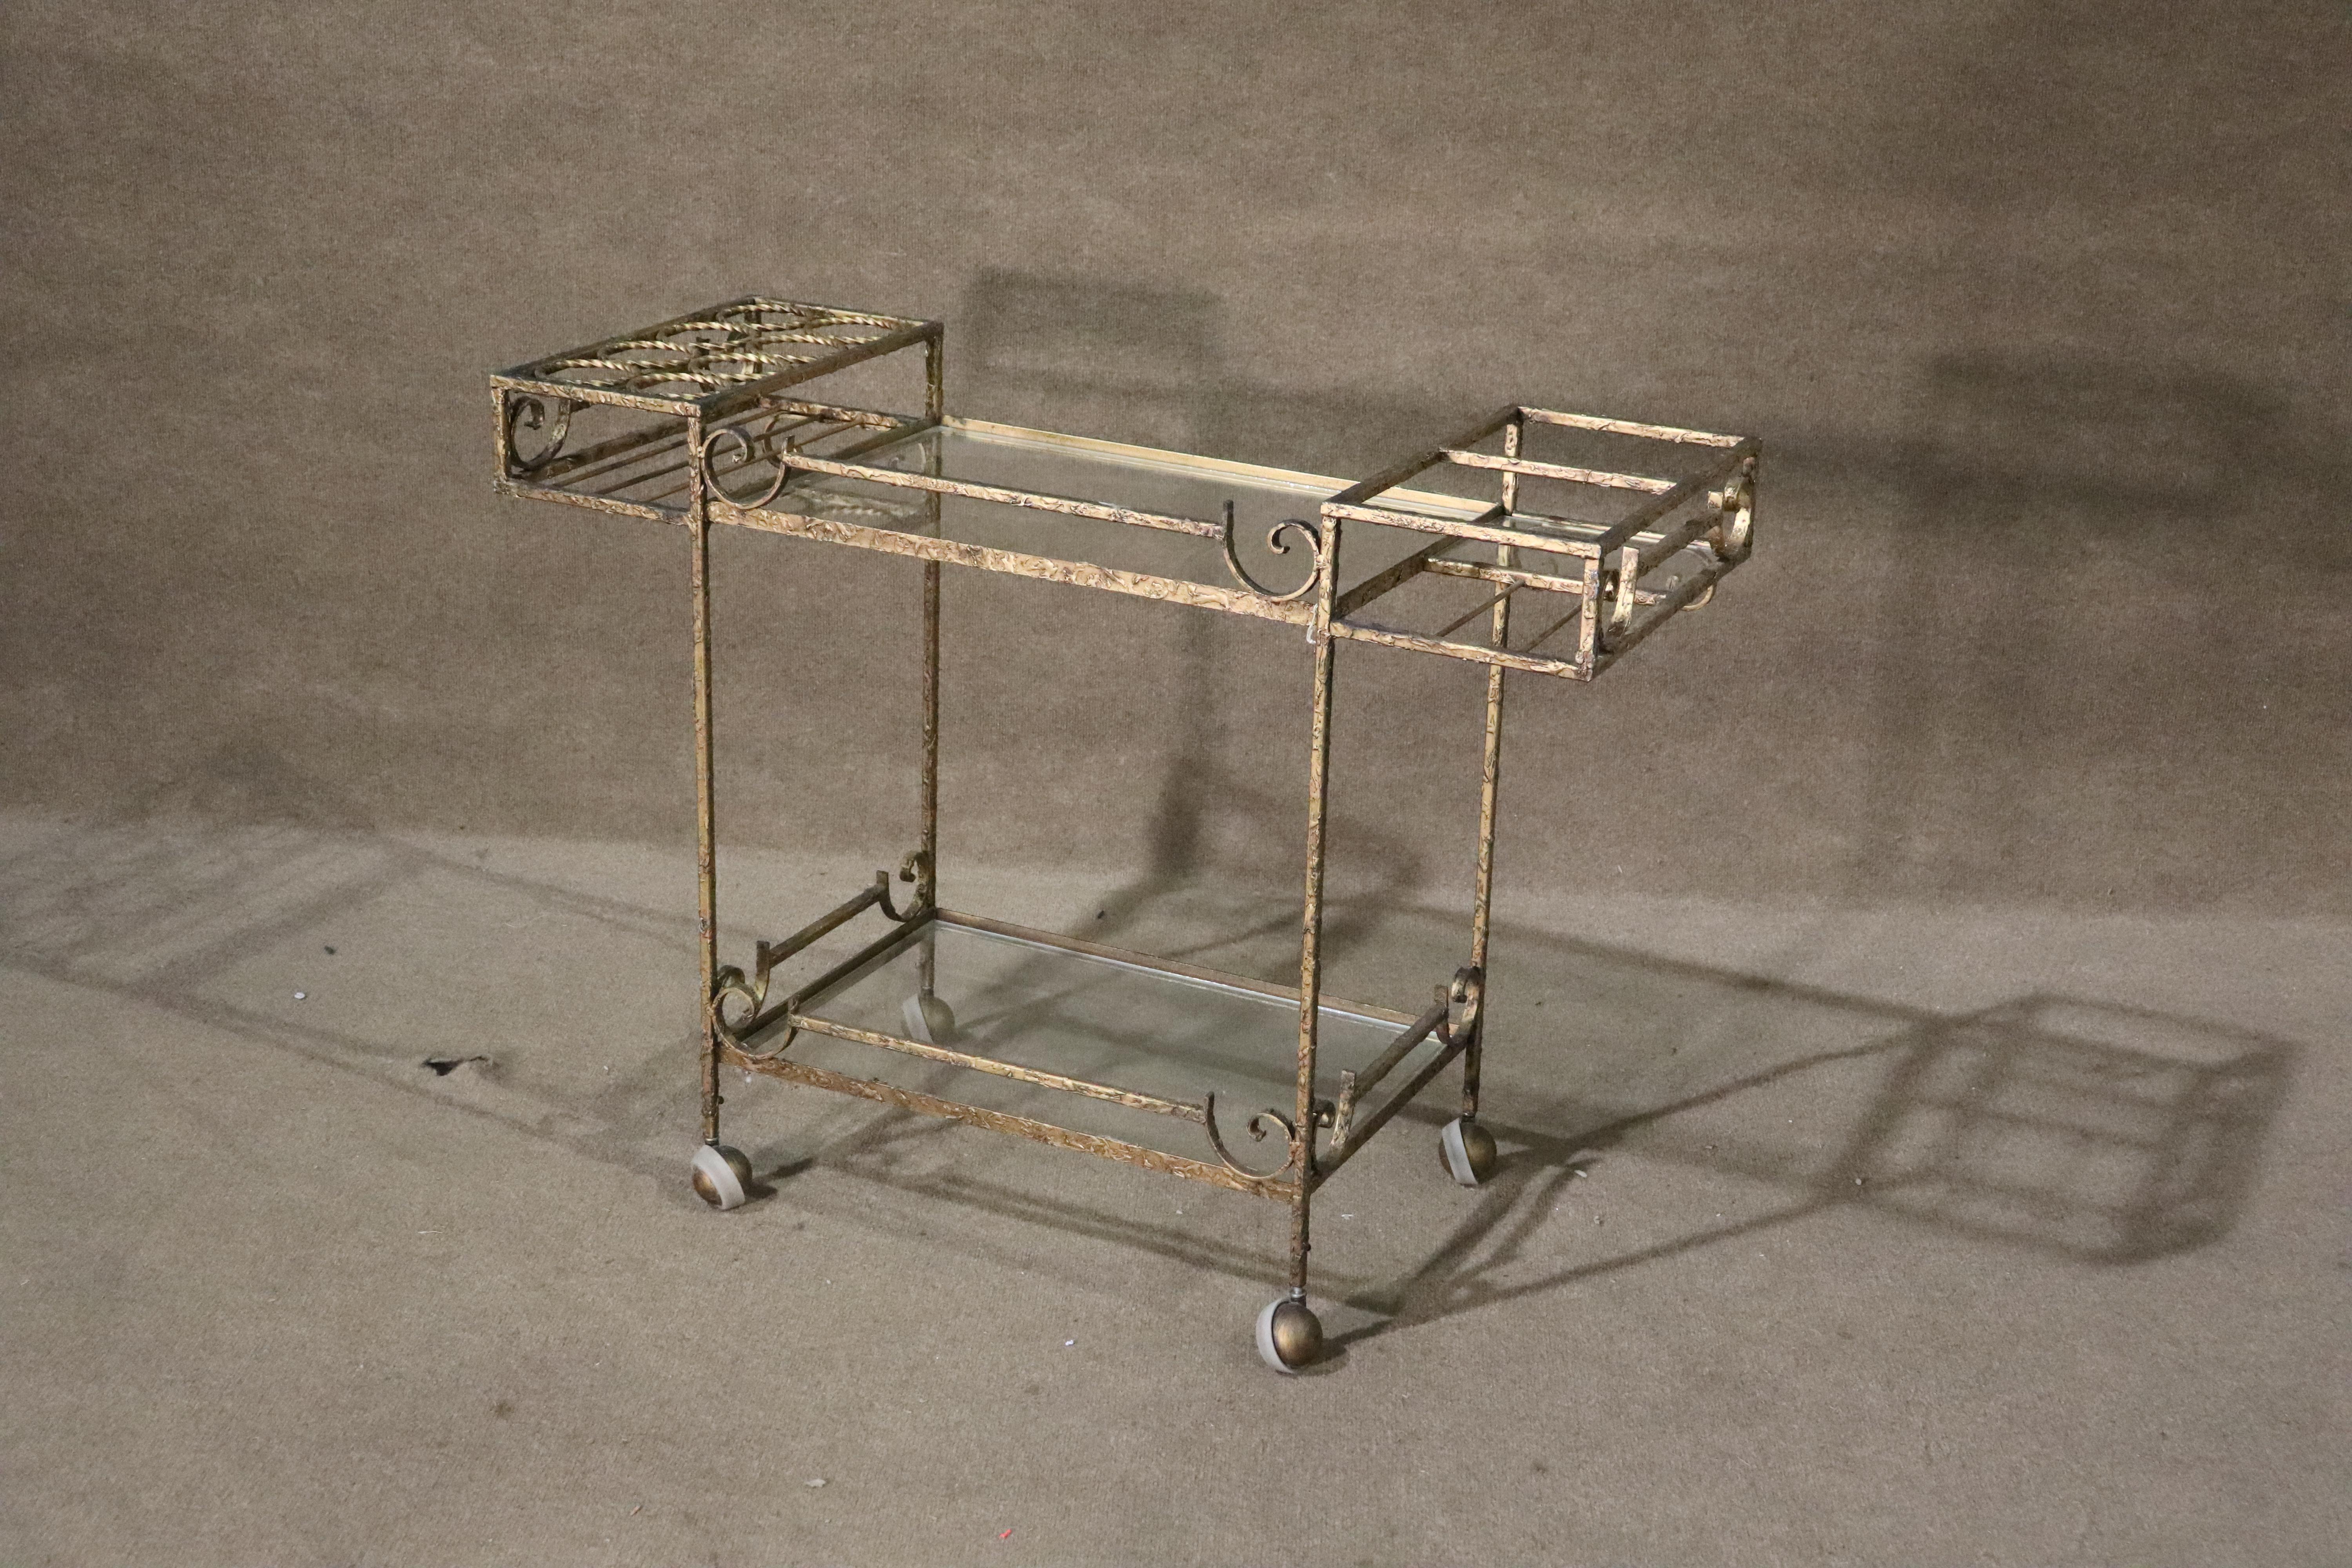 Painted two tier bar cart with glass shelves and storage area.
Please confirm location NY or NJ